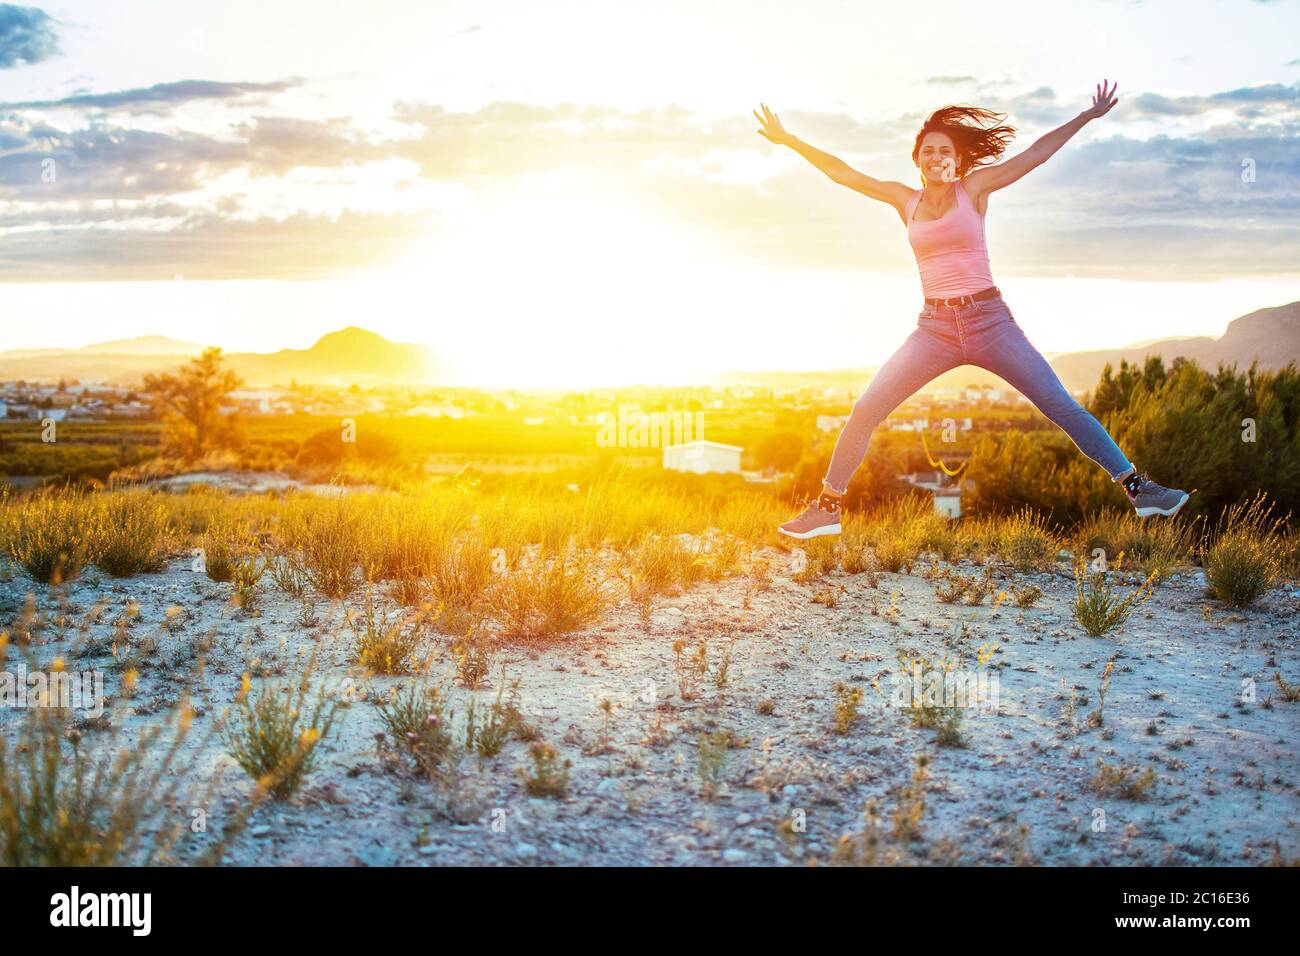 Athletic young girl jumping freely at mountain top against sunset